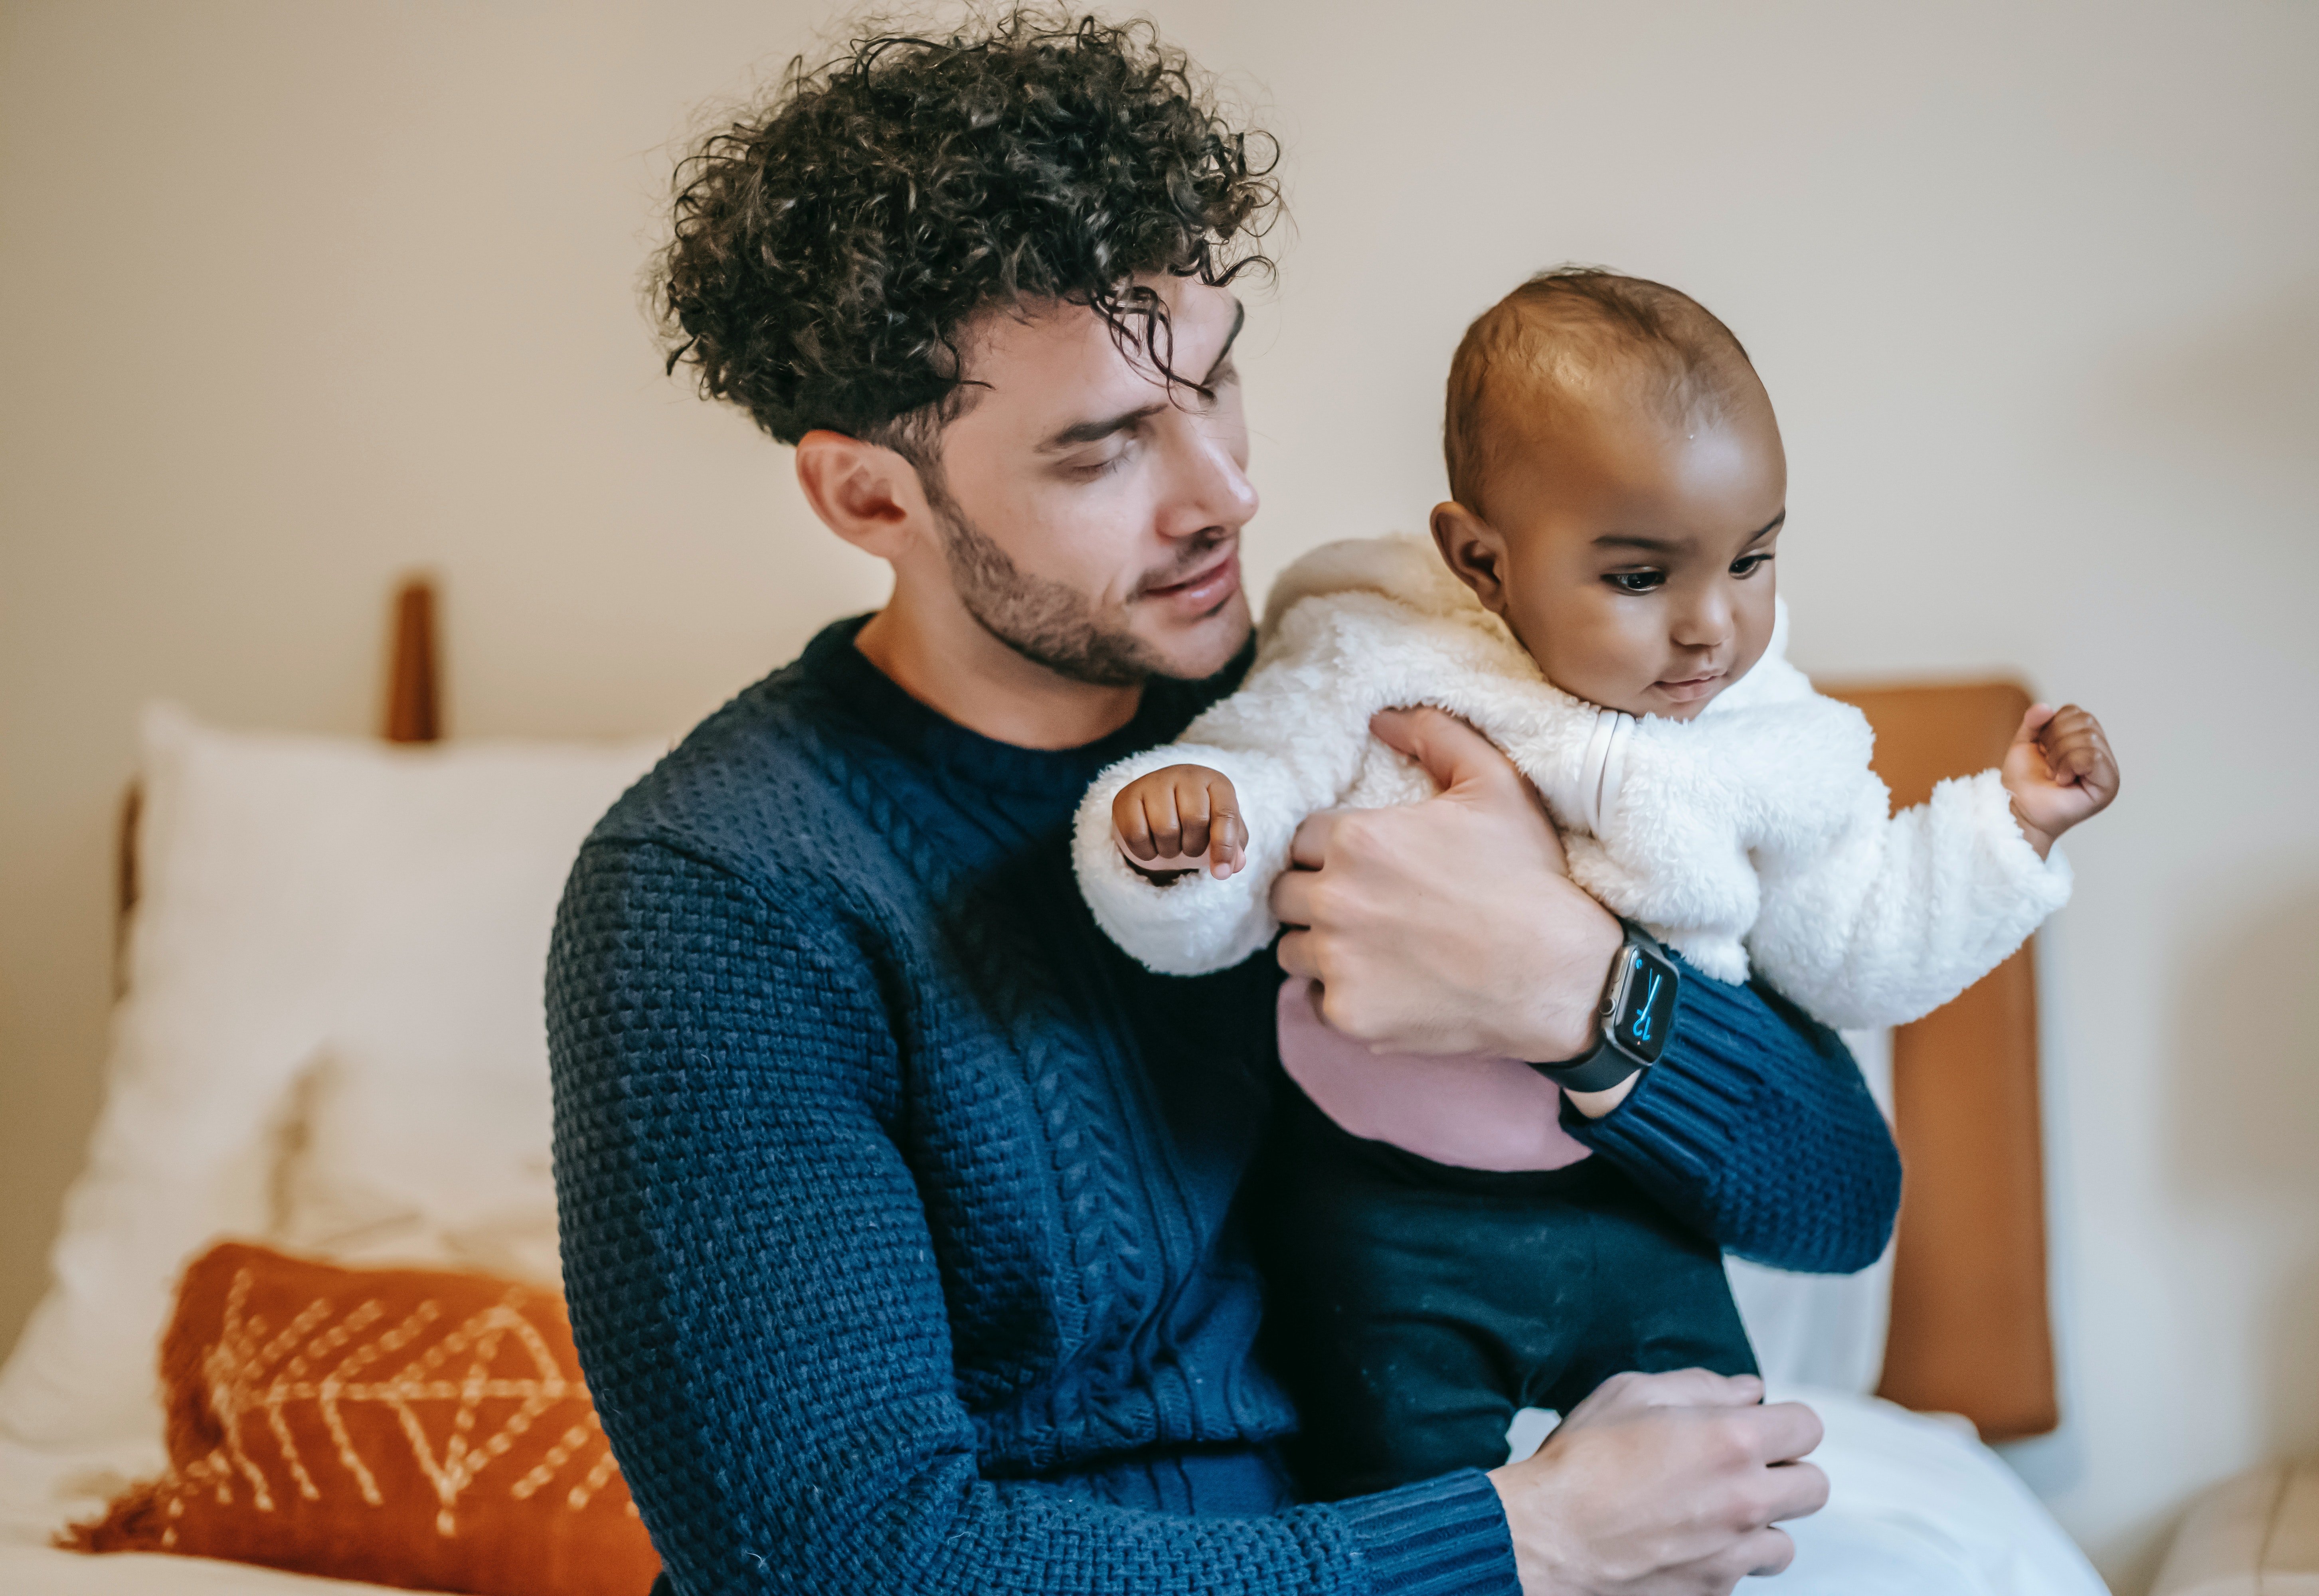 OP could no longer hold back his doubts & took a secret paternity test on his son.  |  Source: Pexels